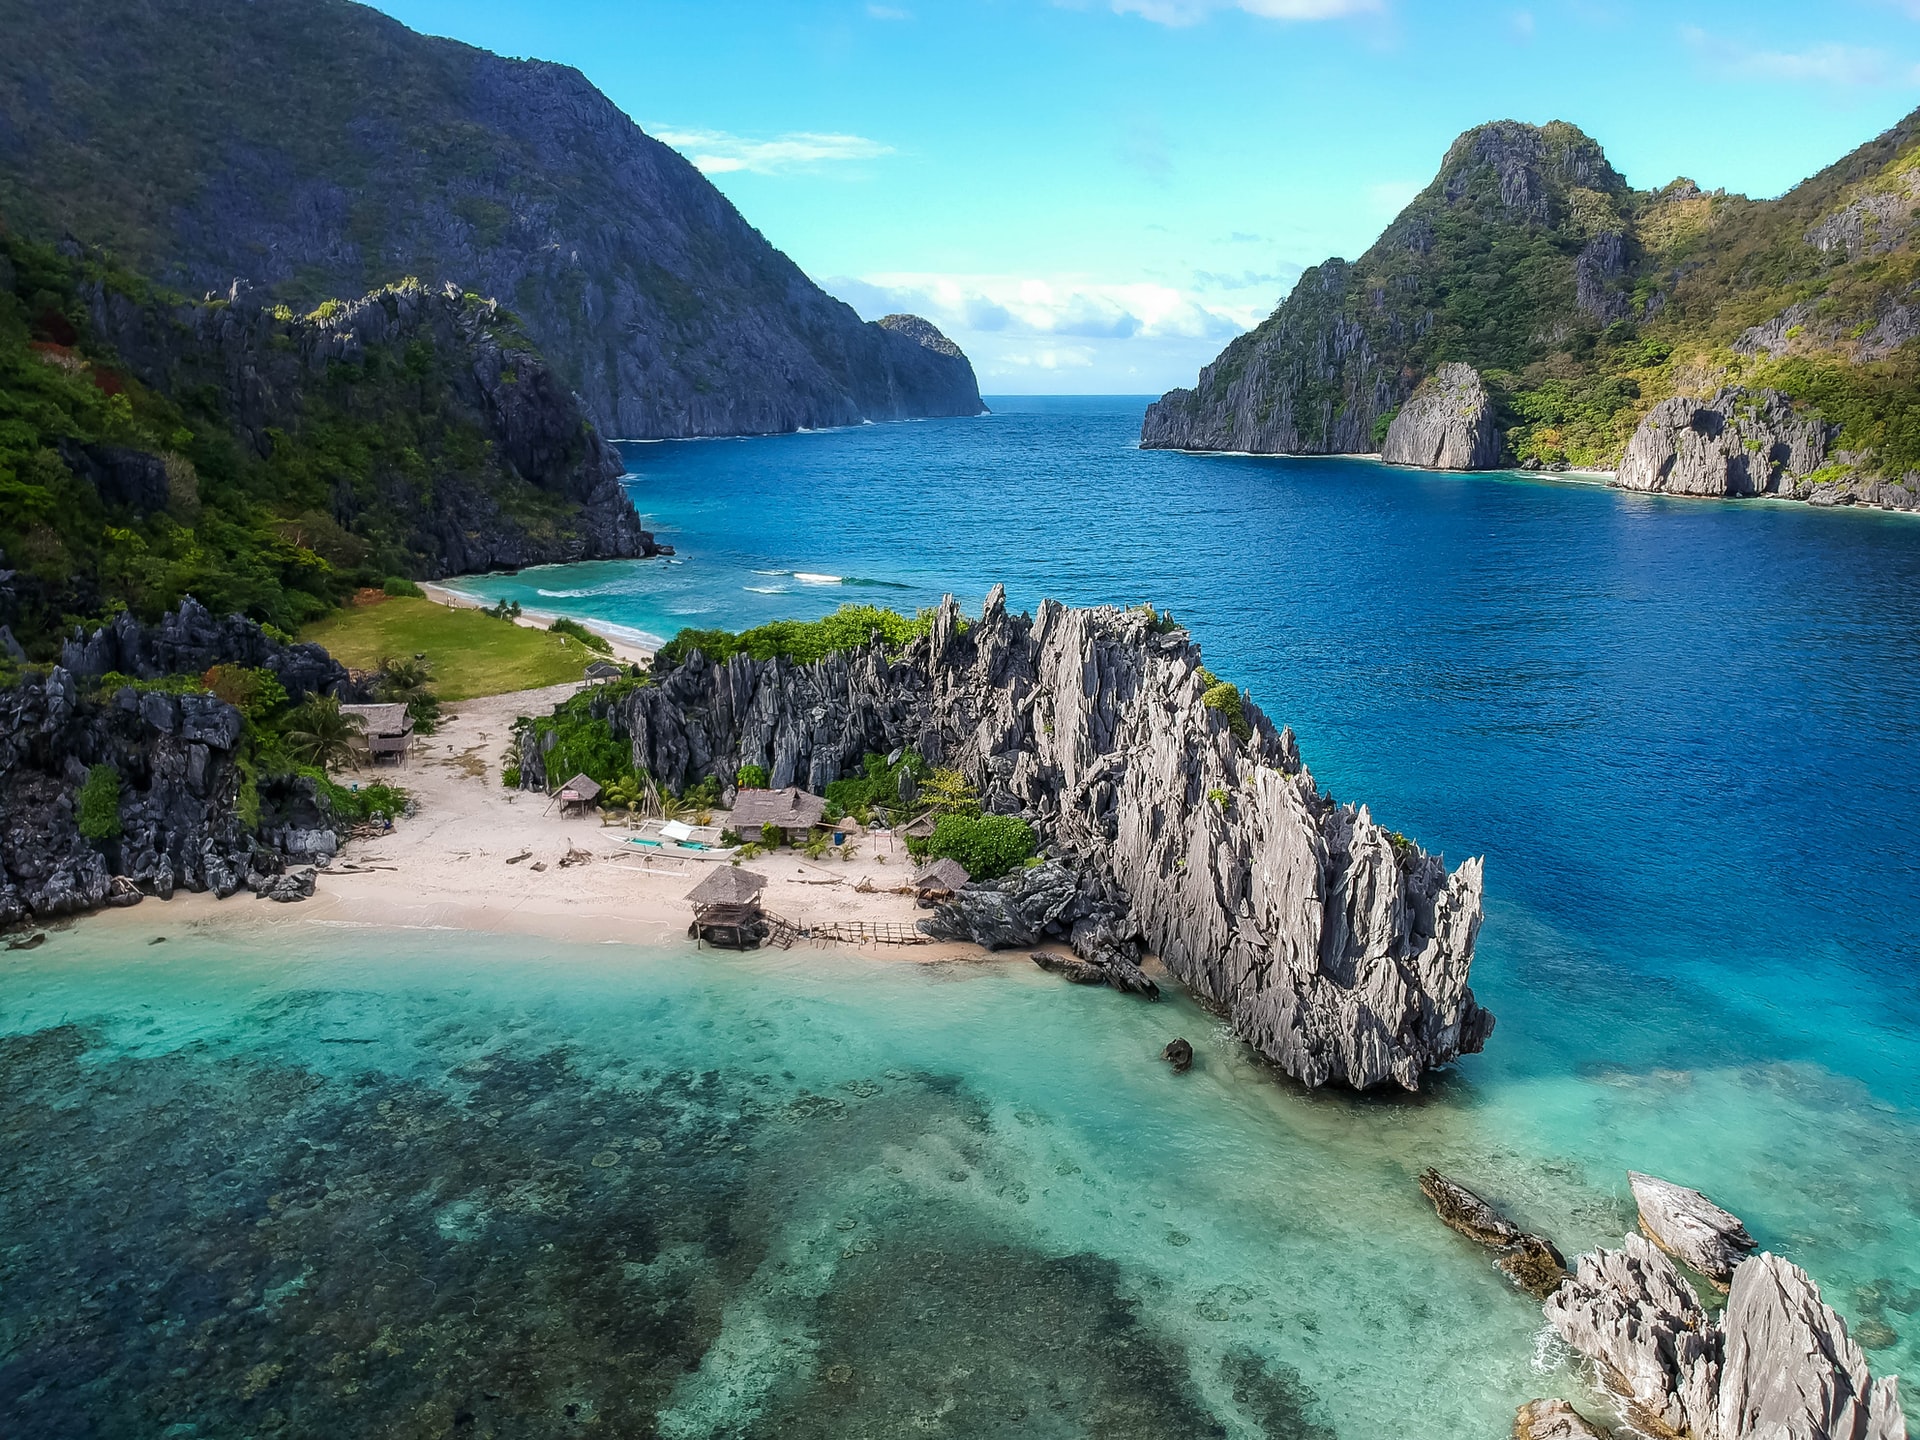 Top 15 Interesting Facts About Philippines You Might Not Know